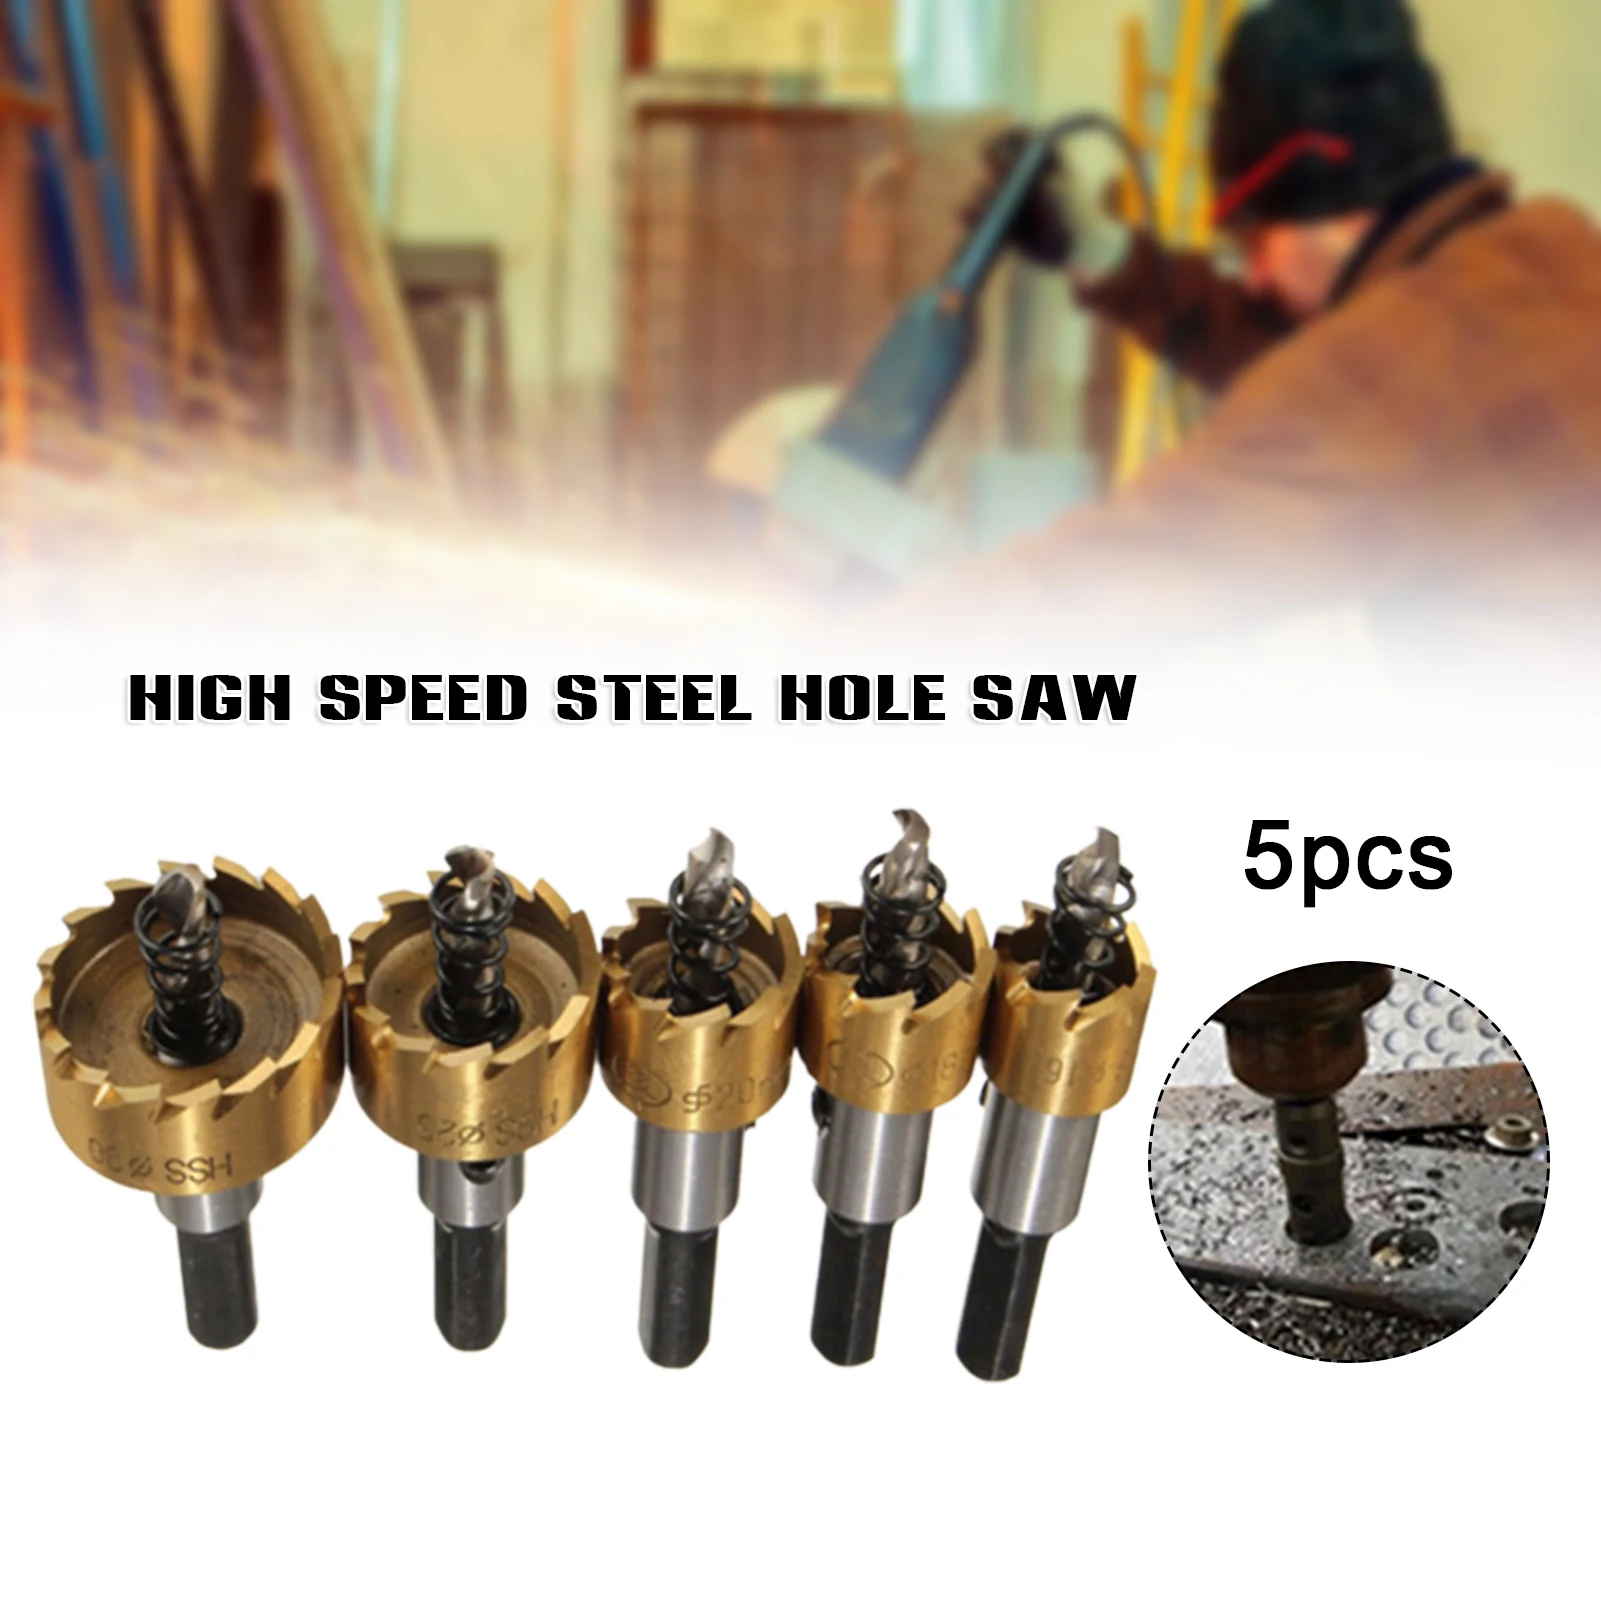 

Hole Saw Kits Metal Alloy High Speed Steel Drill Bit Hole Saw Set Tooth Cutter For Wood Metal Multipurpose Drill Bits J2Y